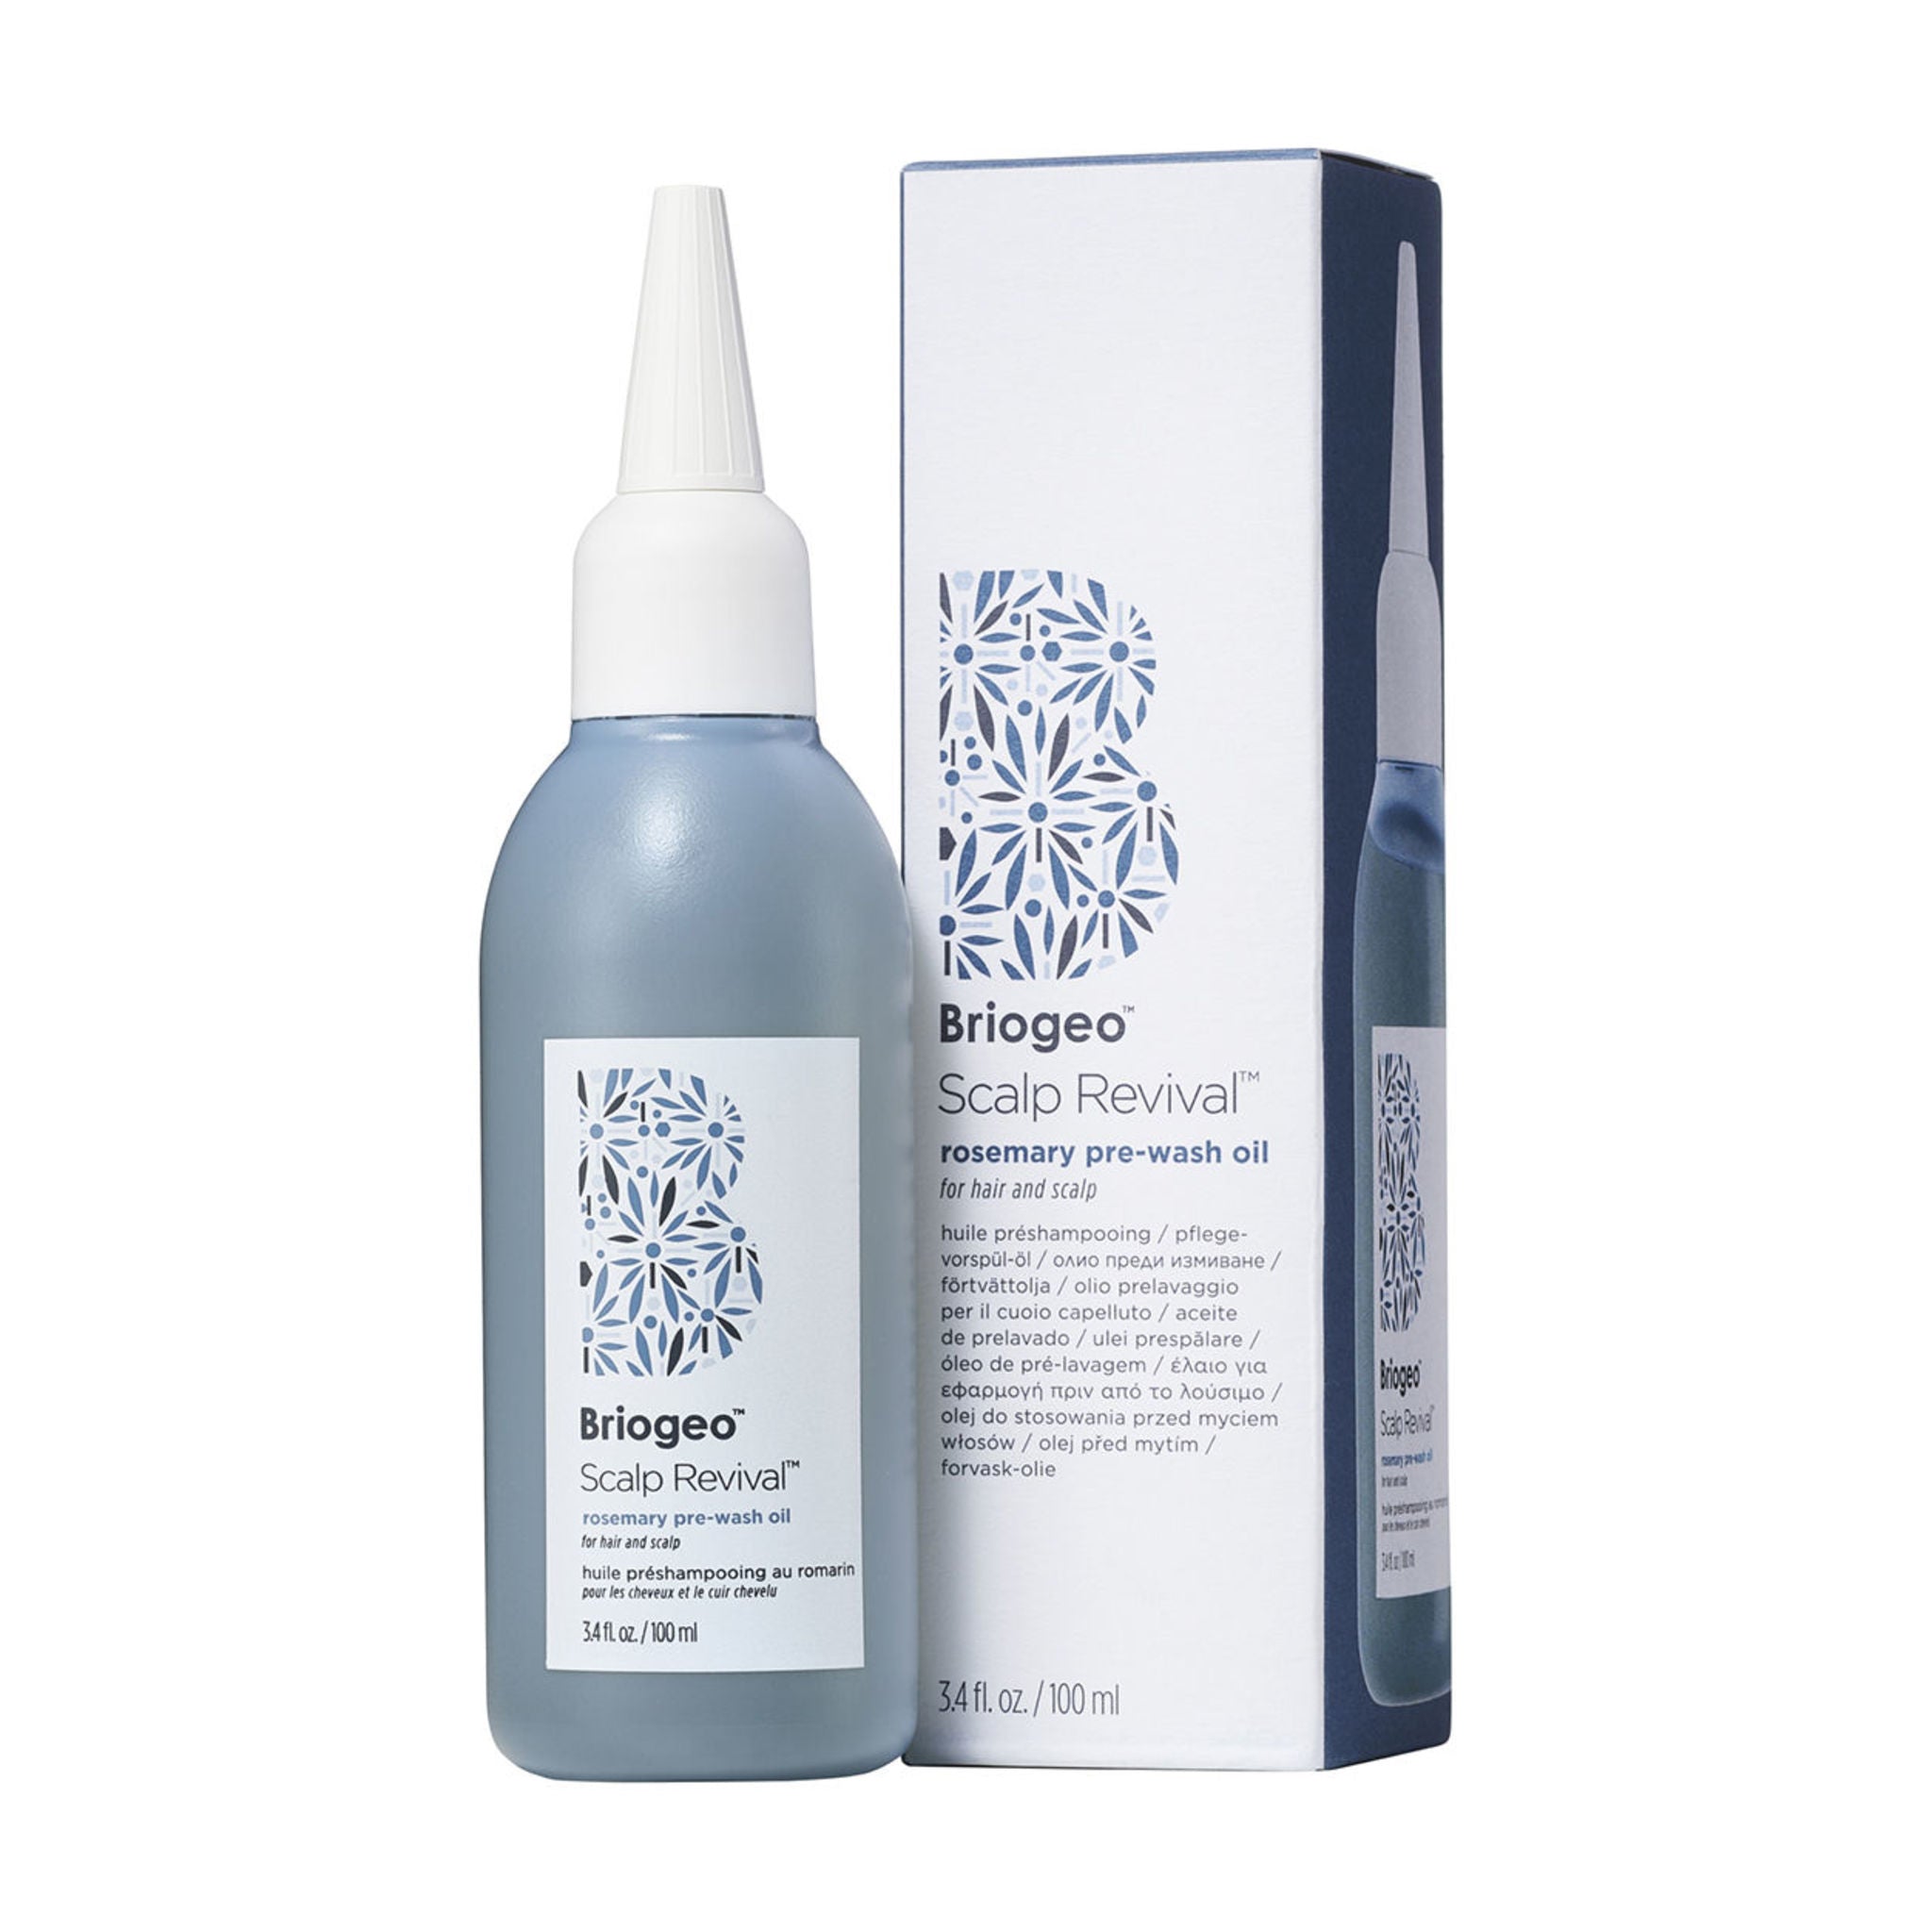 Briogeo Scalp Revival Rosemary Pre-wash Oil for Hair and Scalp main image.